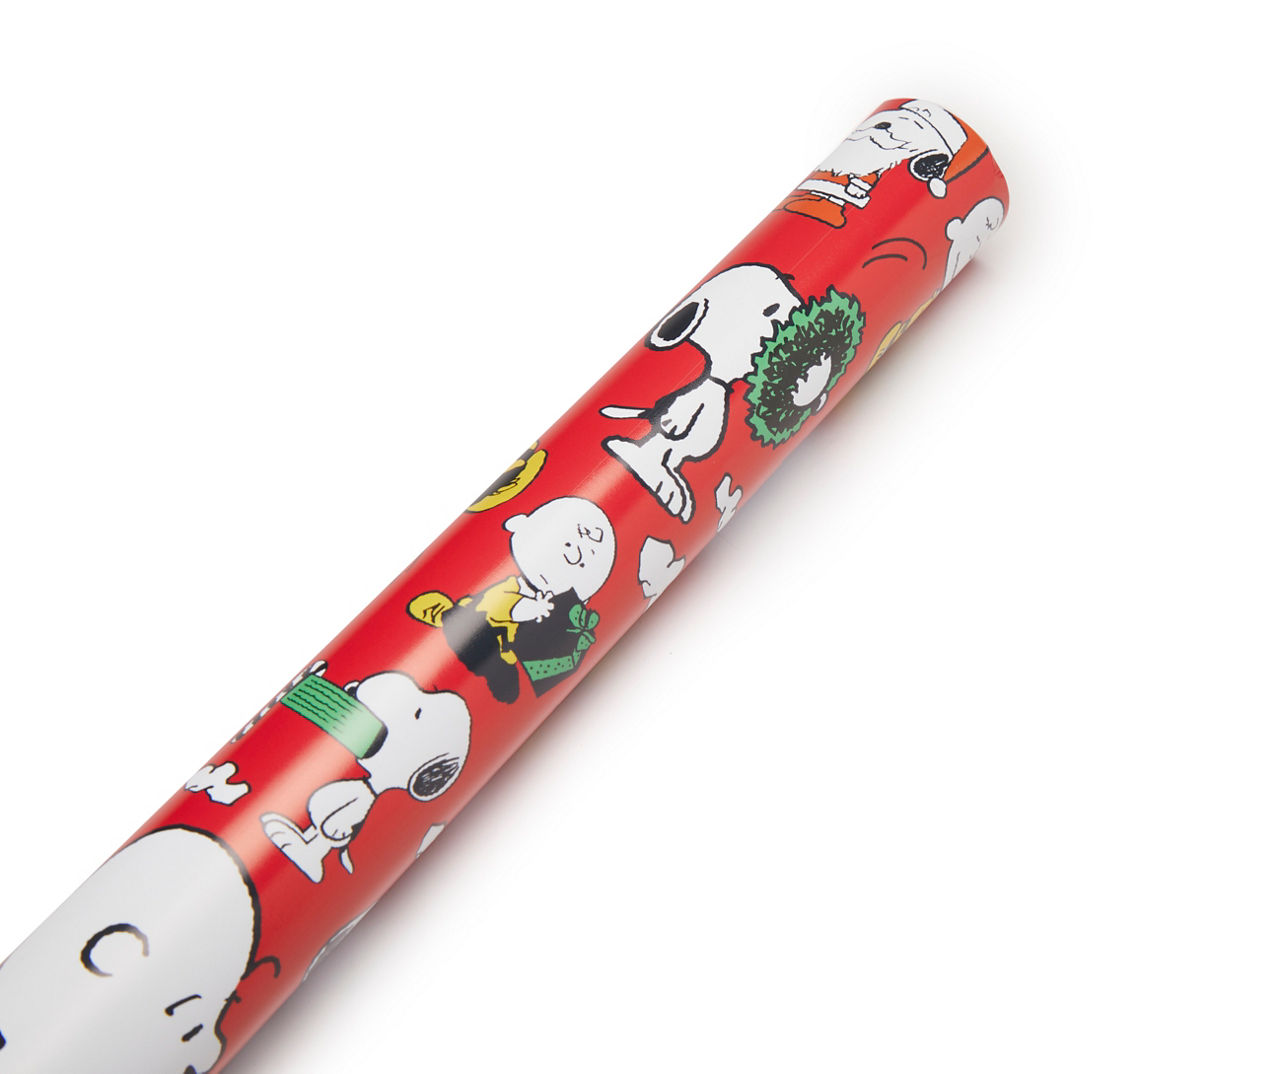 Peanuts Christmas Gift Wrapping Supplies